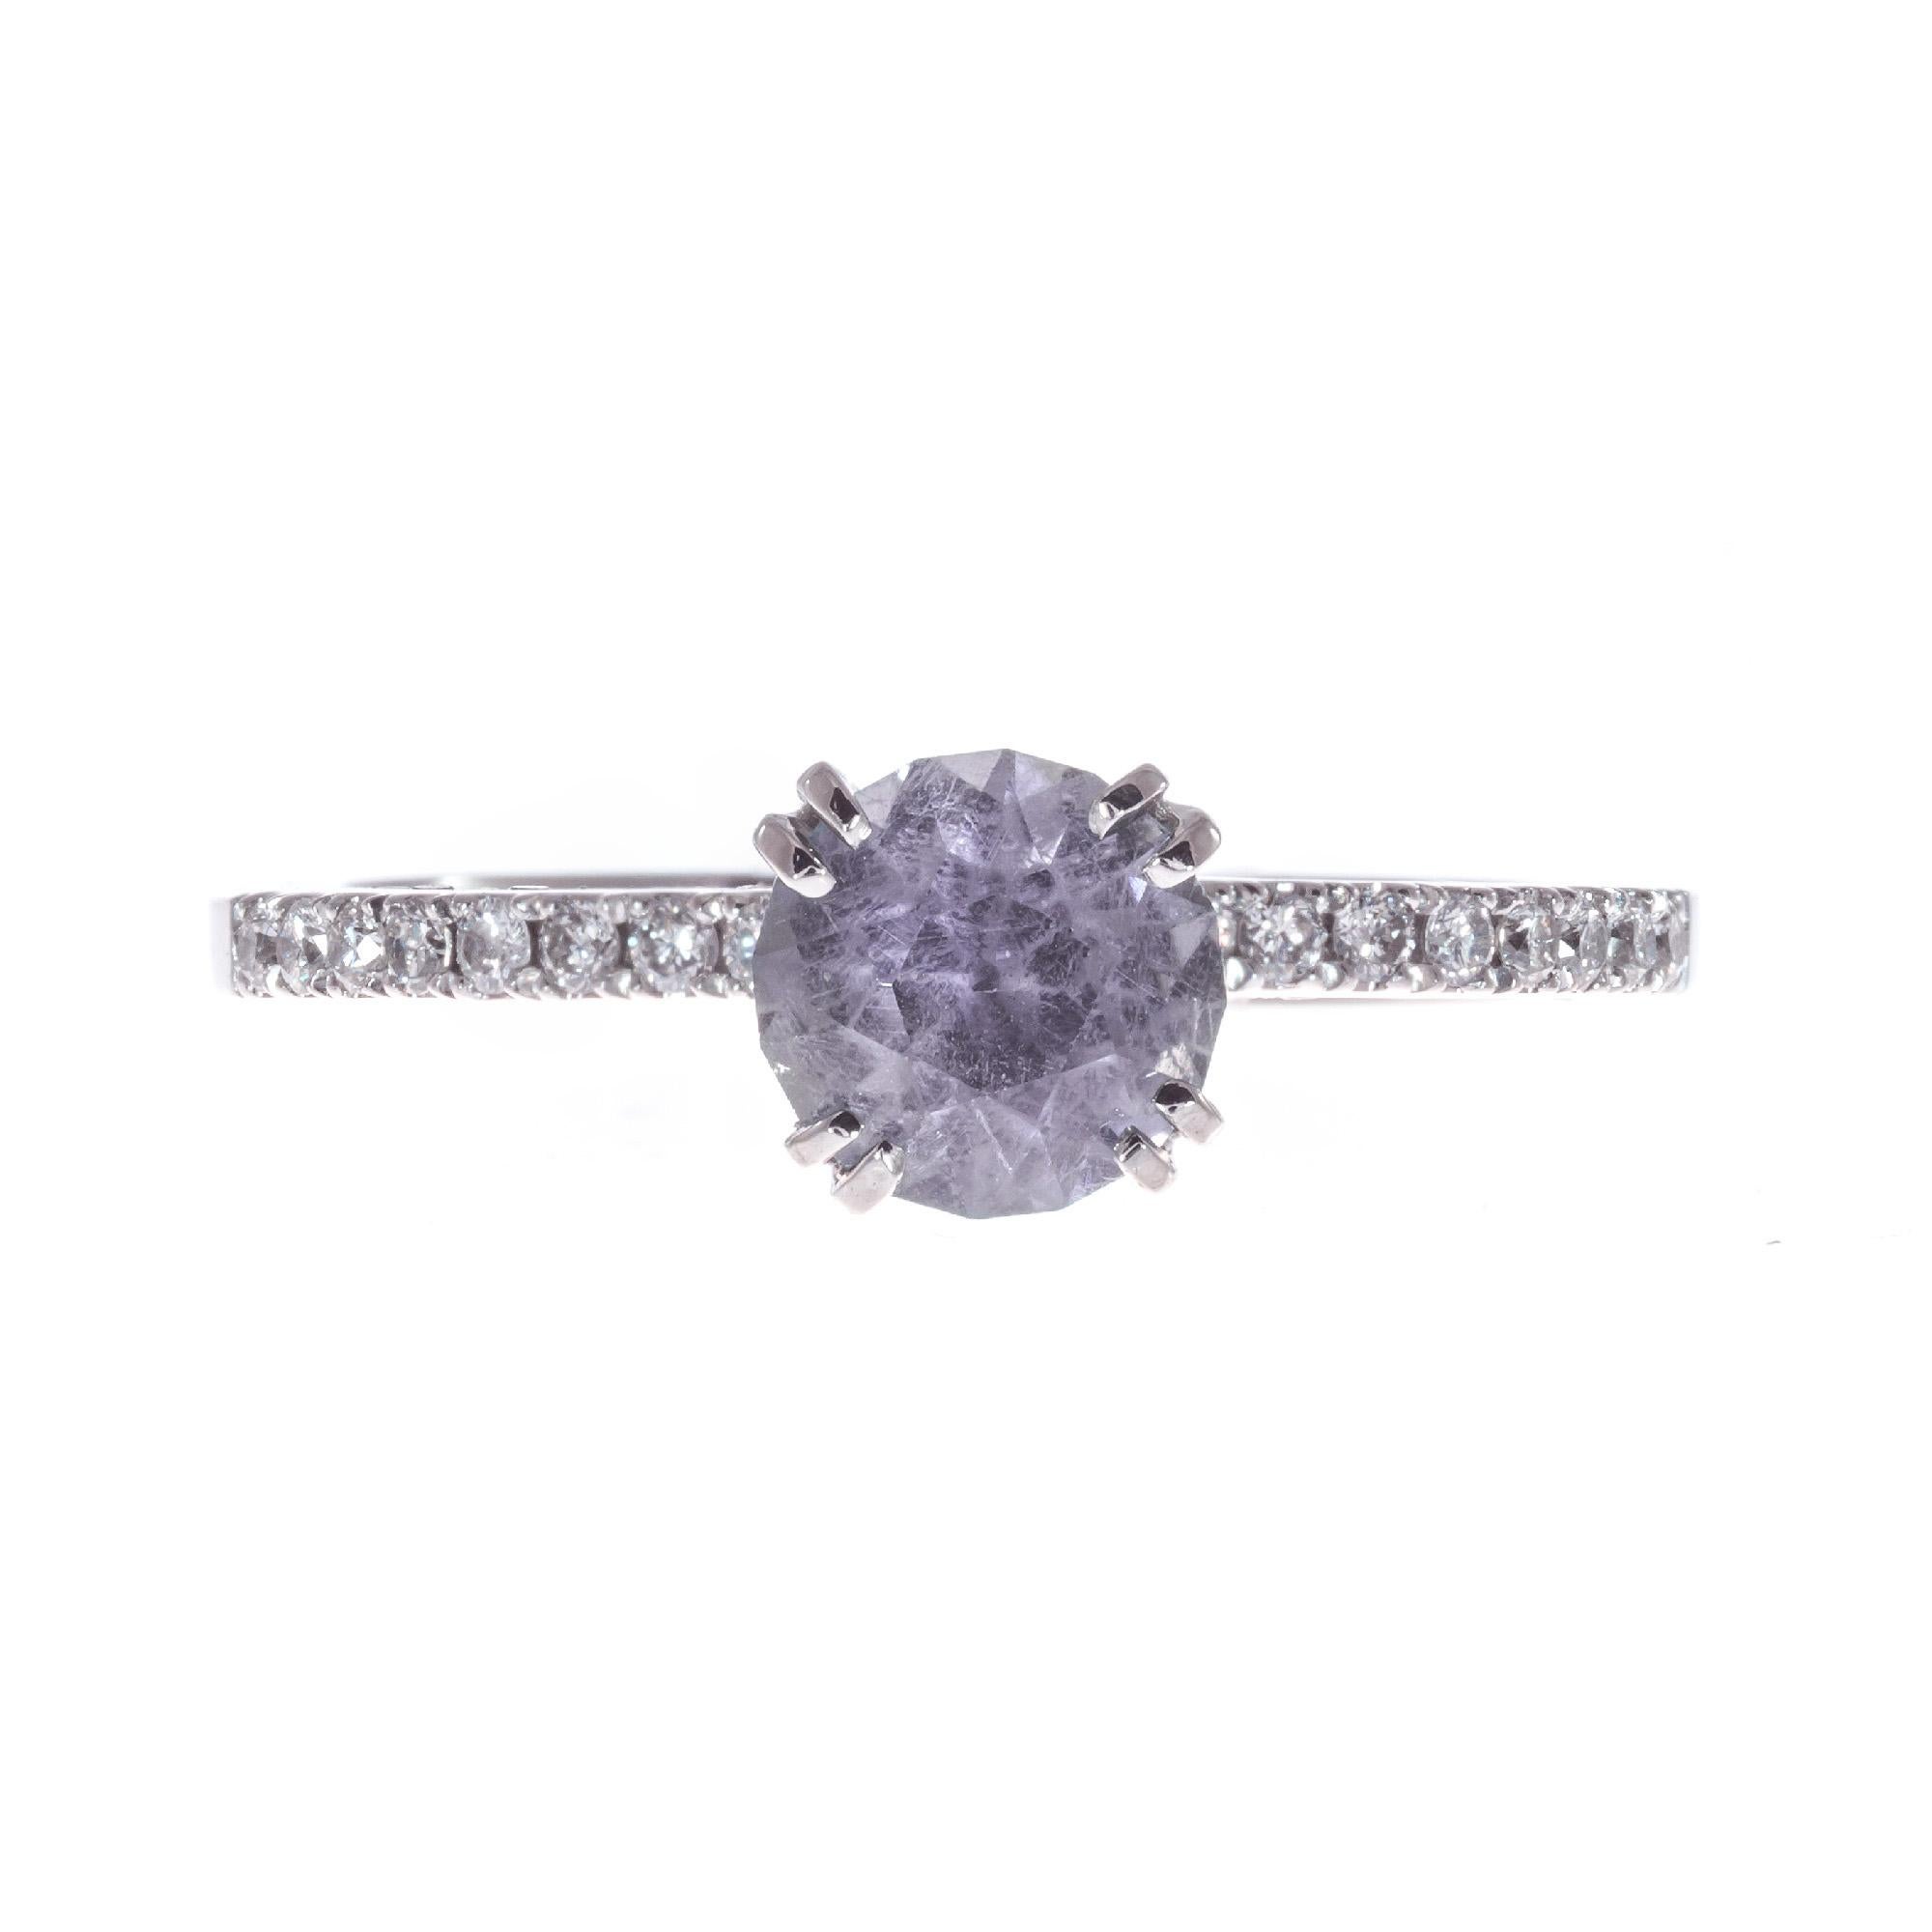 Peter Suchy sapphire and diamond engagement ring. Round GIA Certified Montana purple natural untreated sapphire center stone. Platinum setting with 58 micro pave round brilliant cut diamonds.  

1 round grayish purple Montana sapphire, Approximate